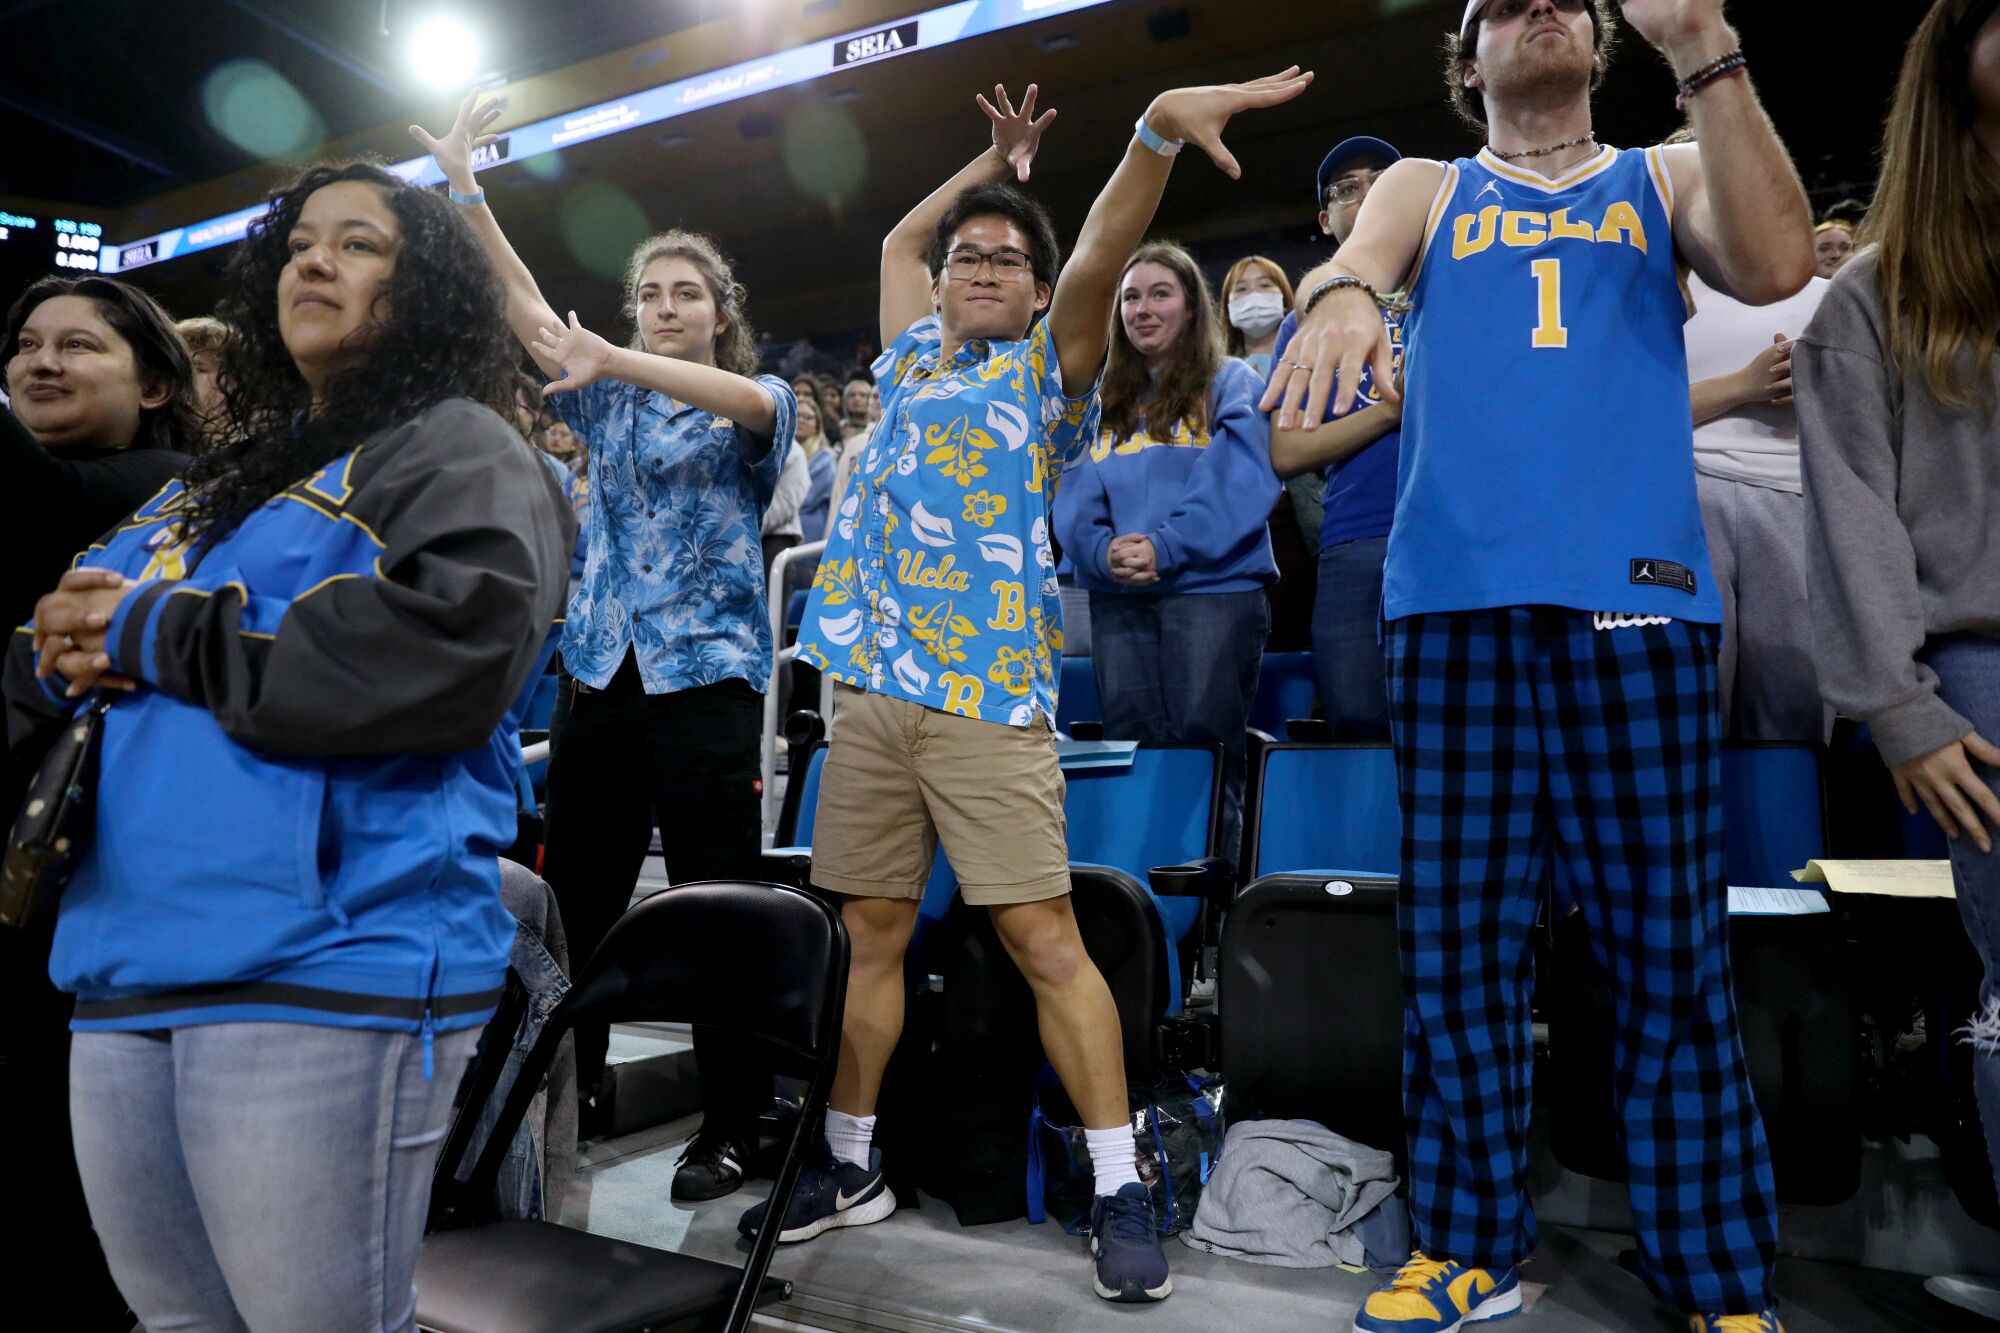 UCLA superfan Josh Lim and friend Laura DeFalco mimic a Bruins gymnast's floor exercise routine.